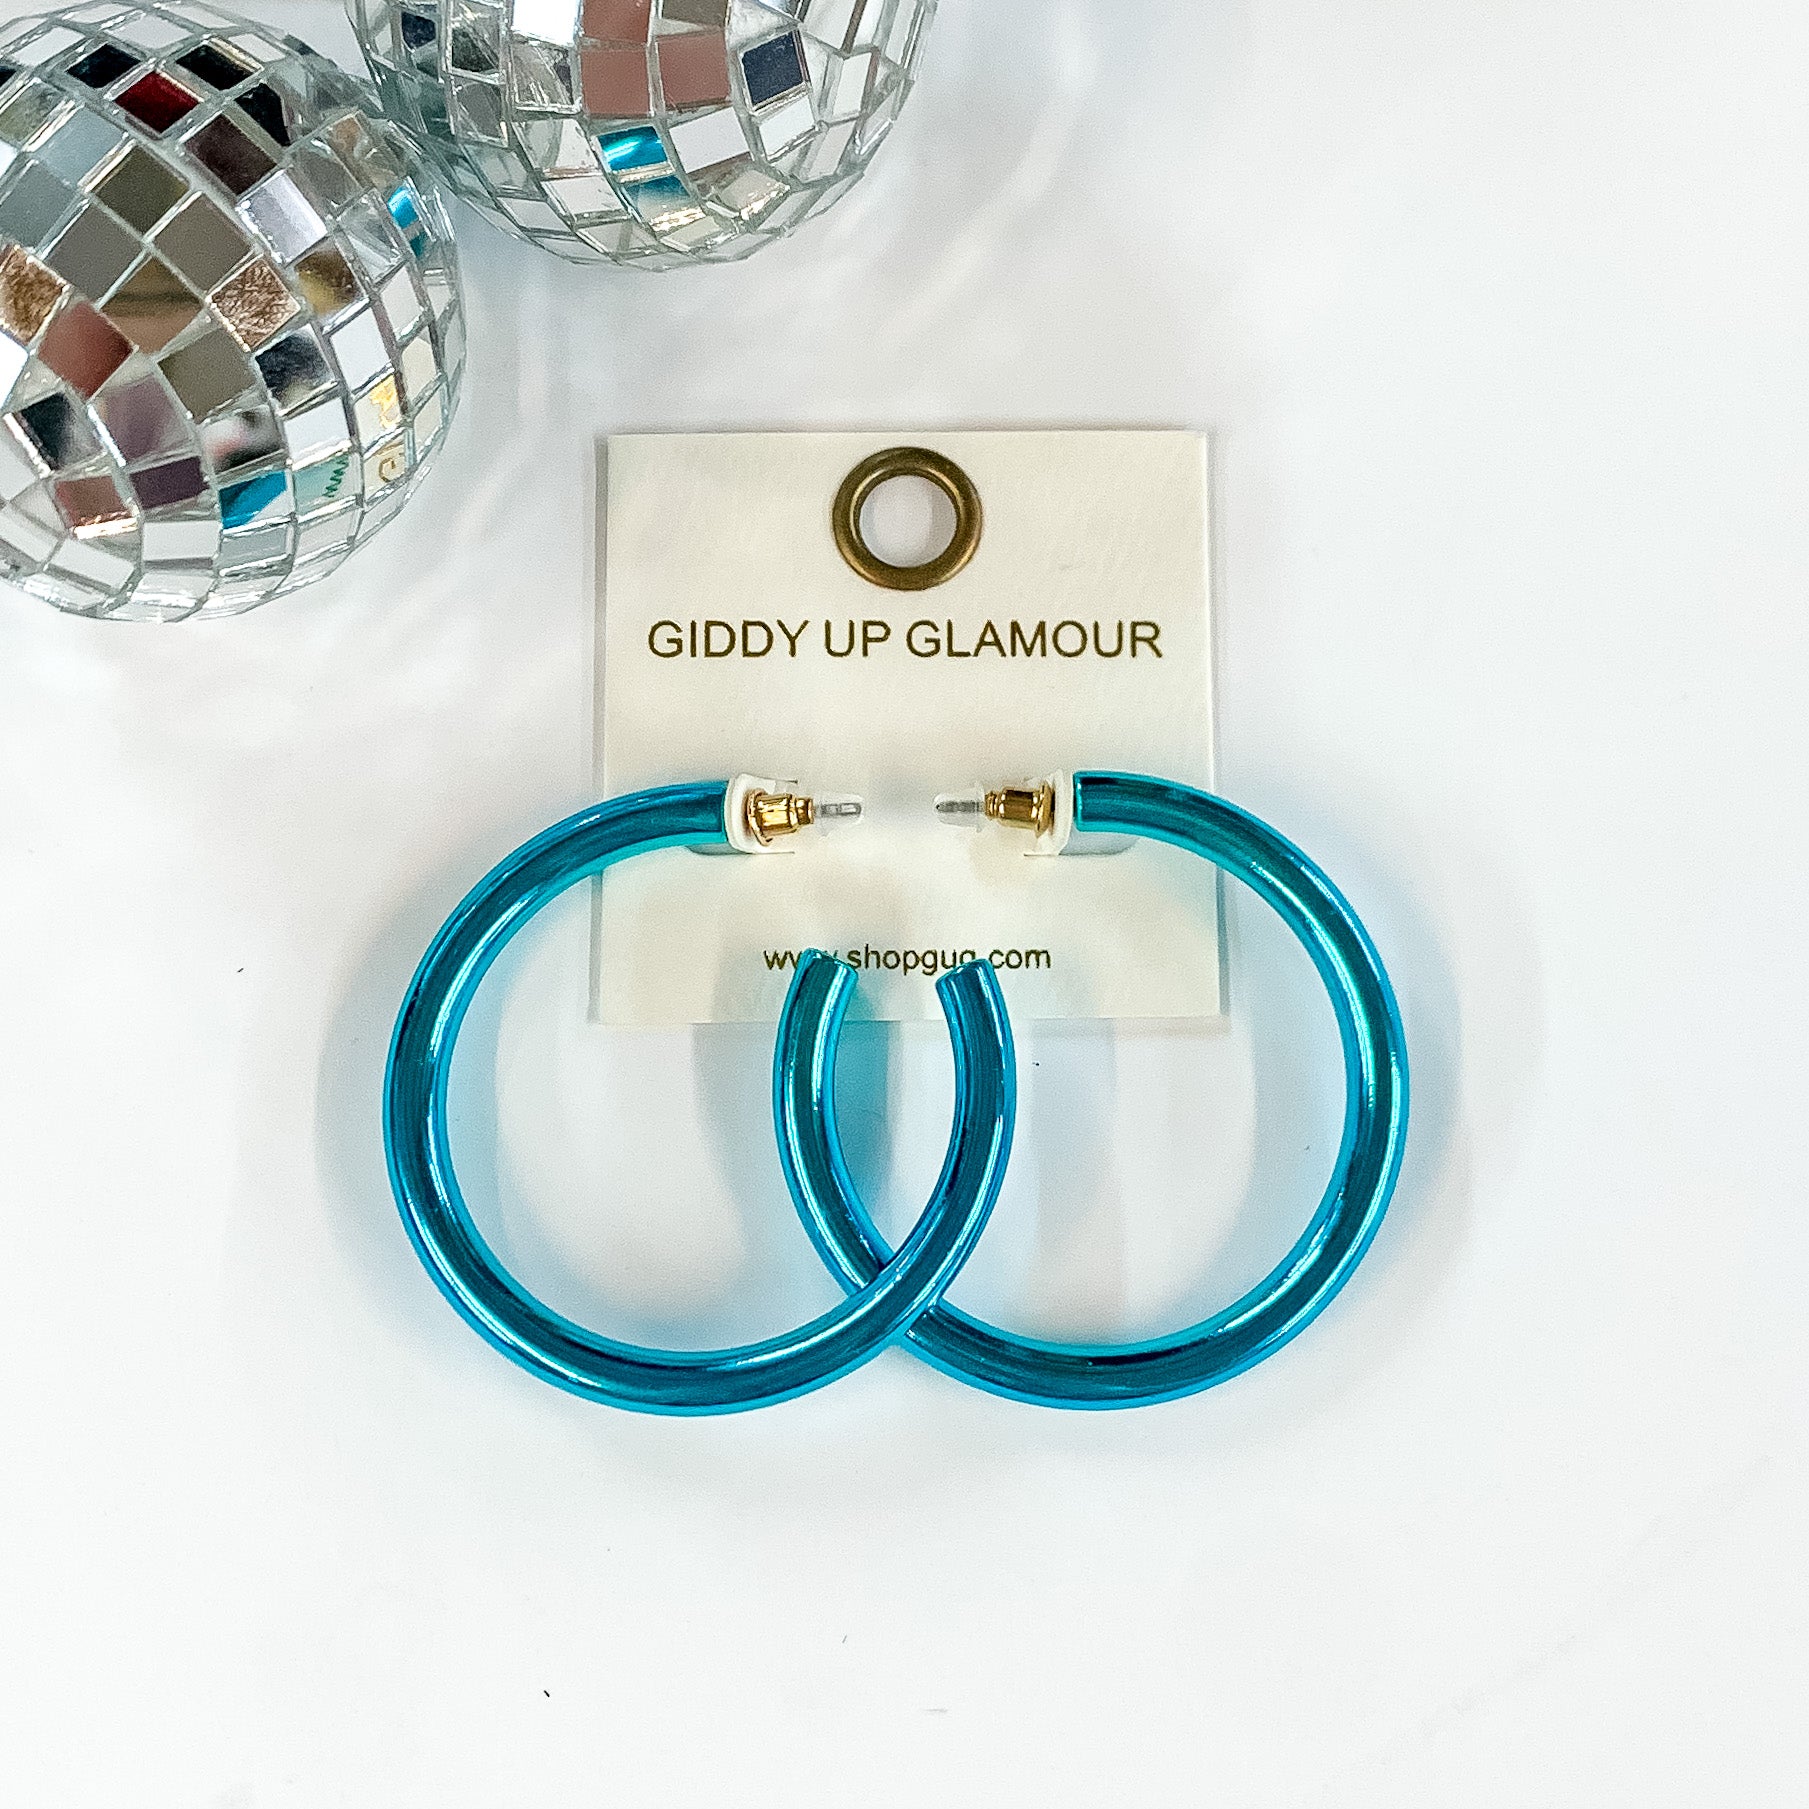 Light Up Large Neon Hoop Earrings In Blue. Pictured on a white background with disco balls in the top left corner.